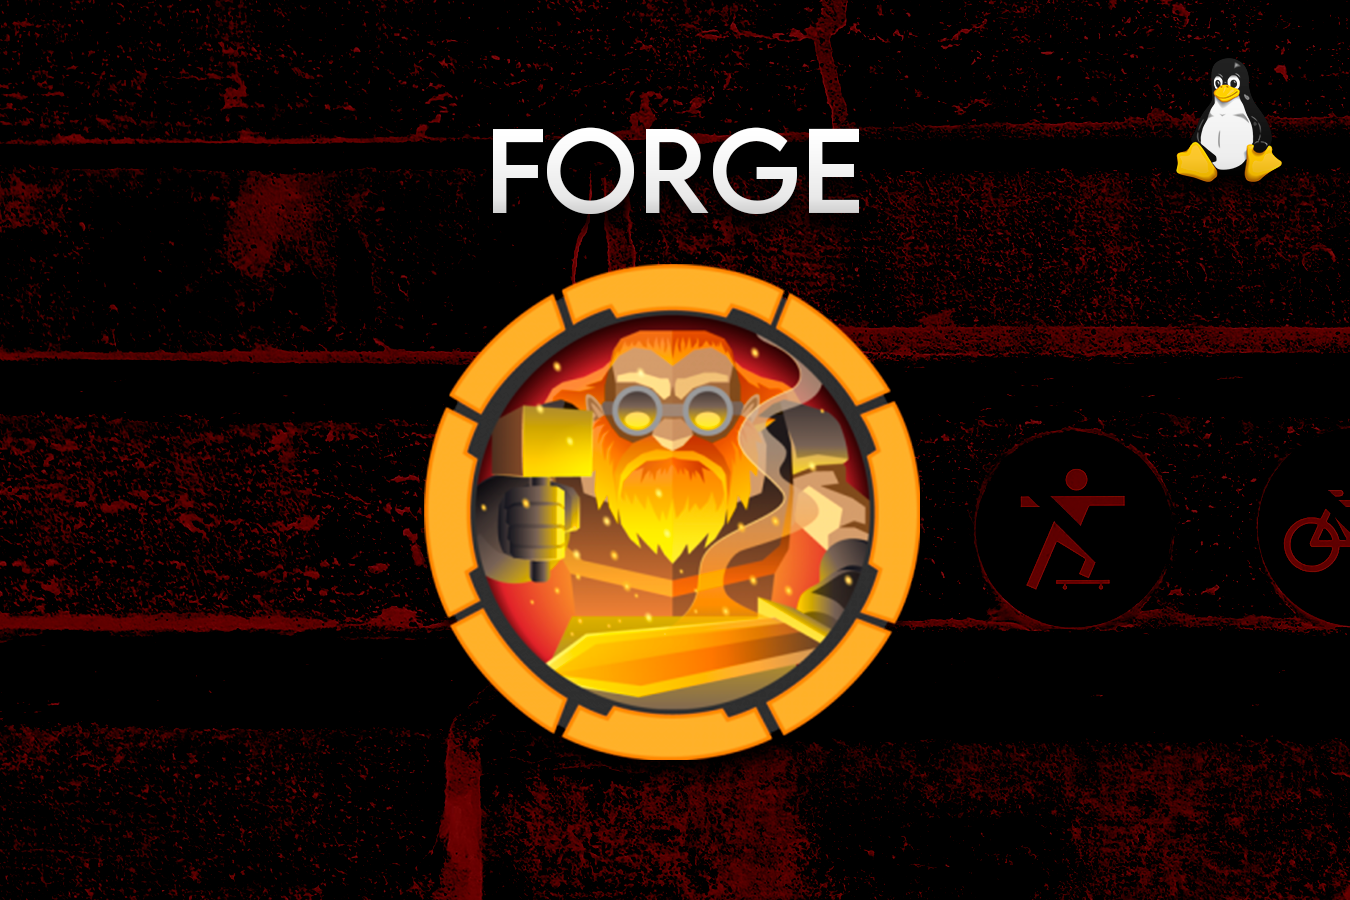 HackTheBox - Forge